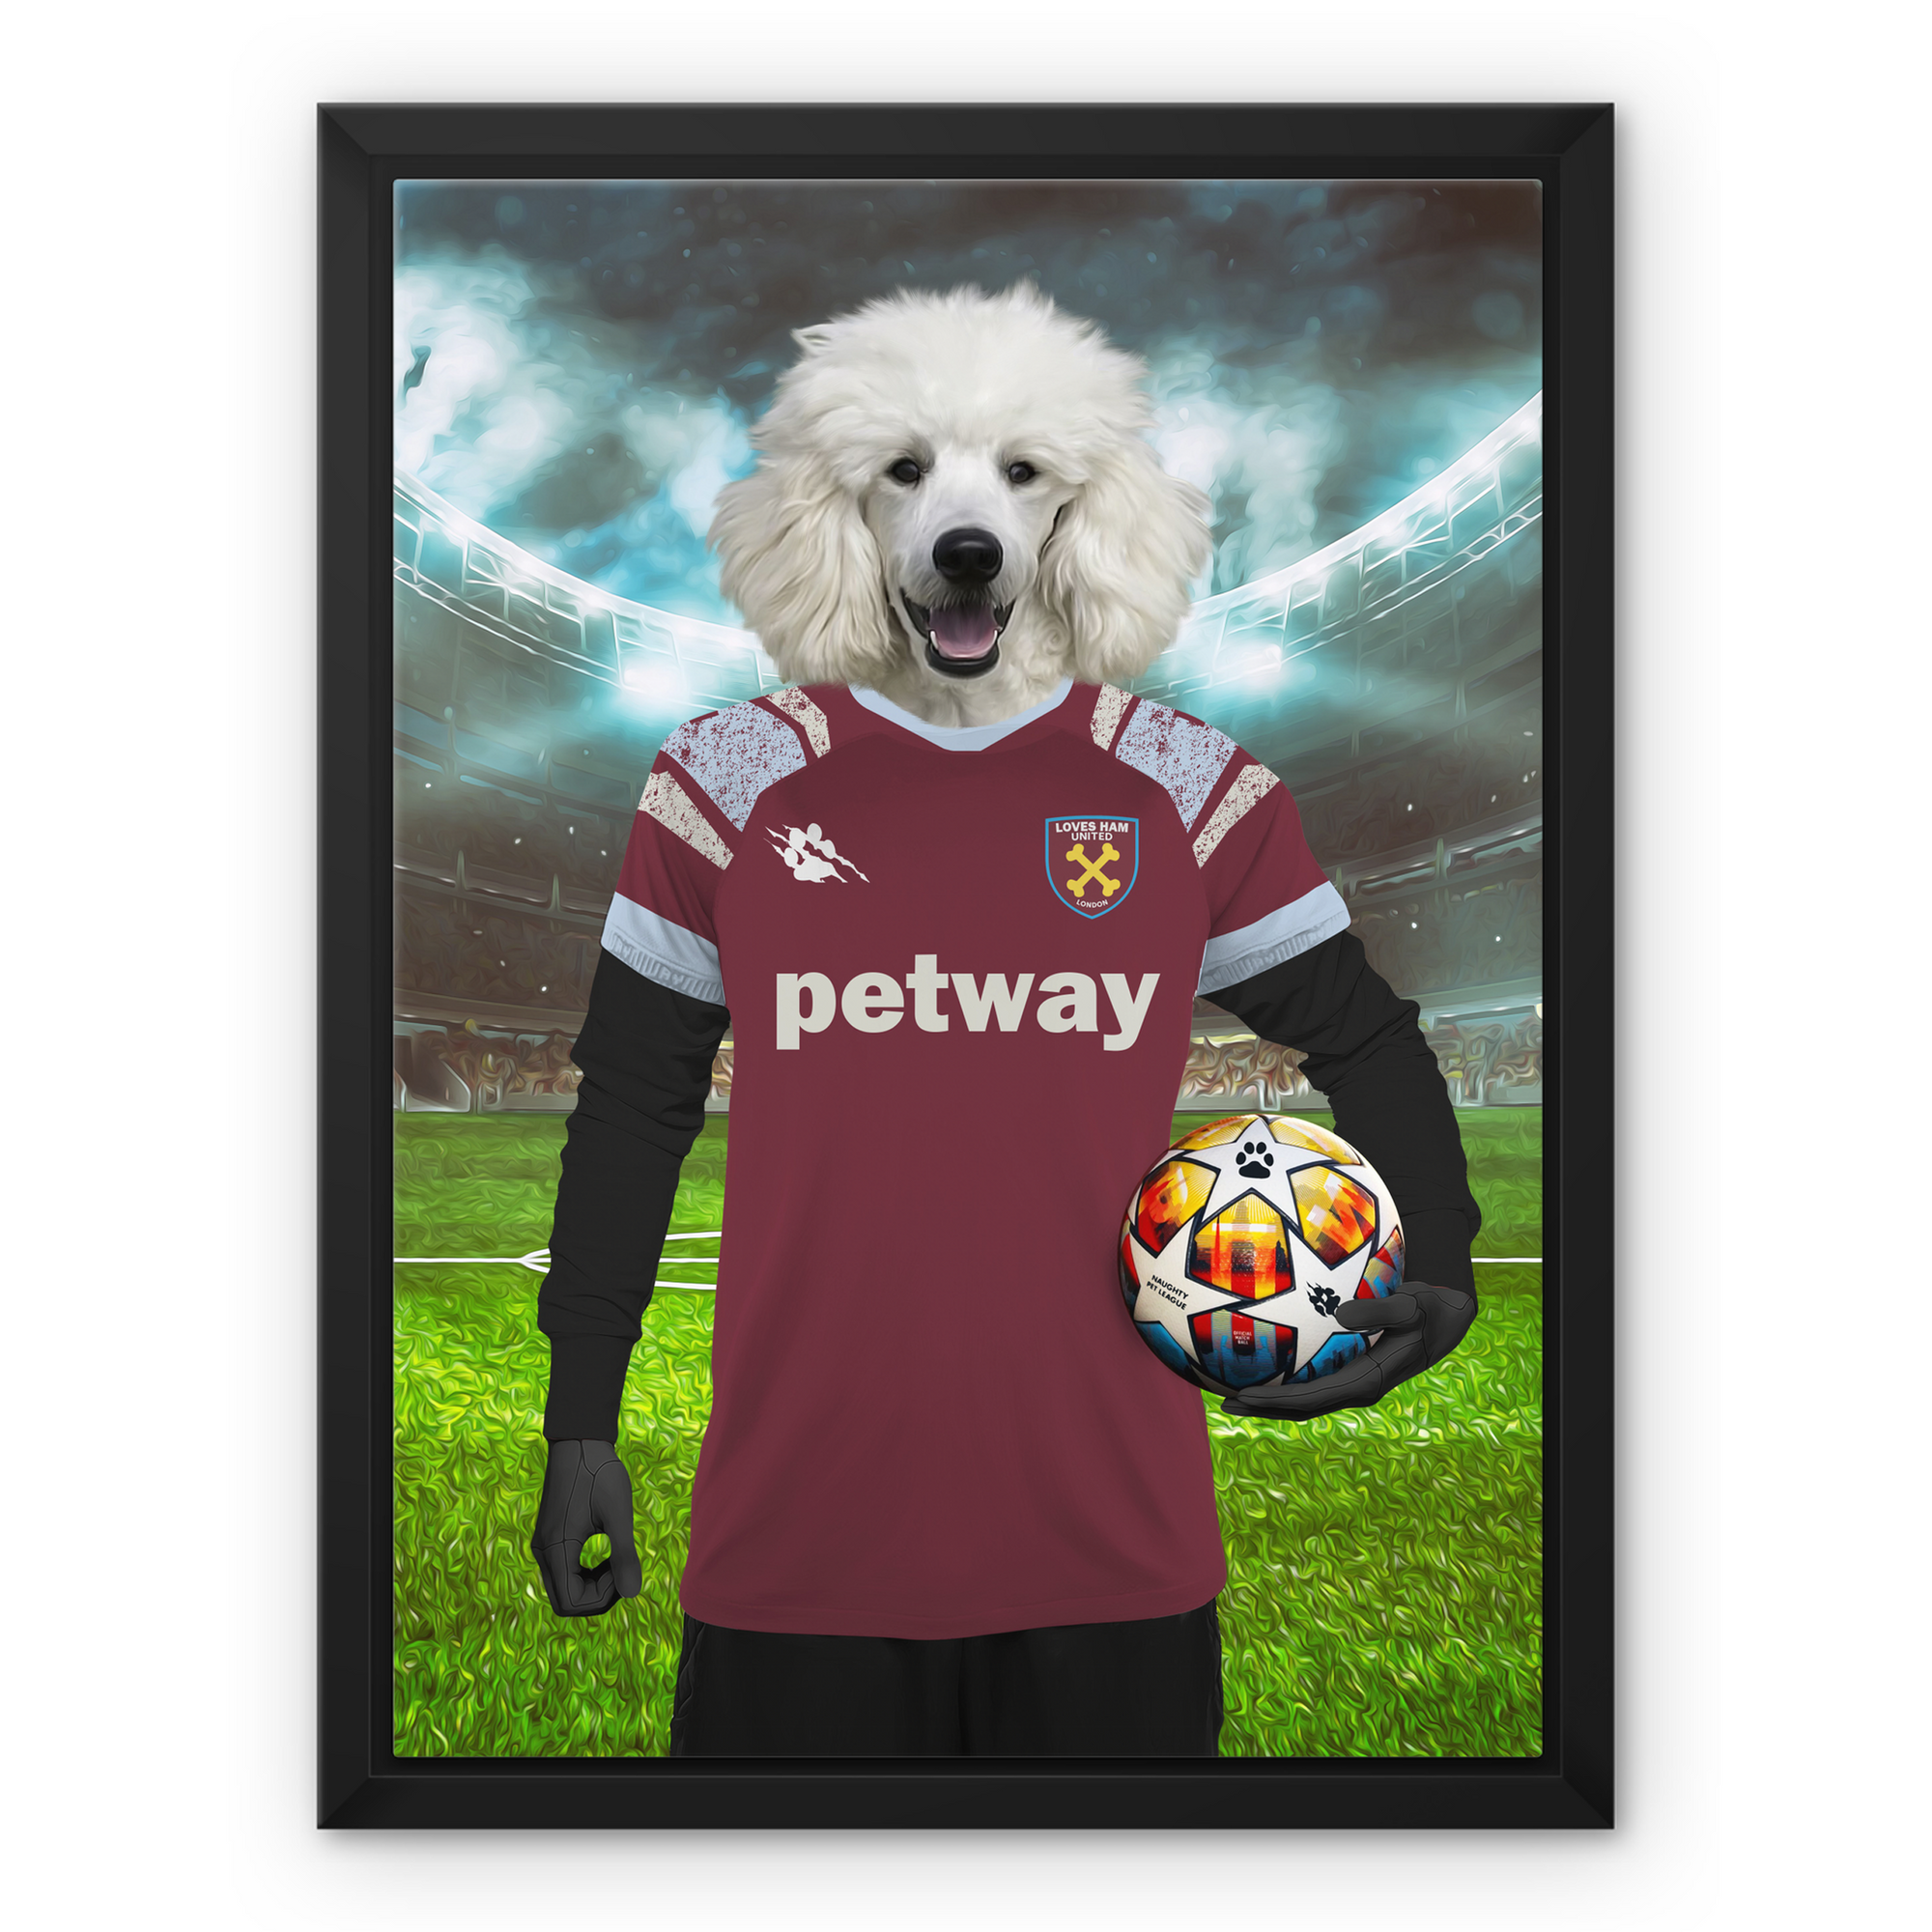 West Ham Football Club: Paw & Glory, paw and glory, for pet portraits, painting of your dog, professional pet photos, best dog paintings, animal portrait pictures, hogwarts dog houses, pet portrait